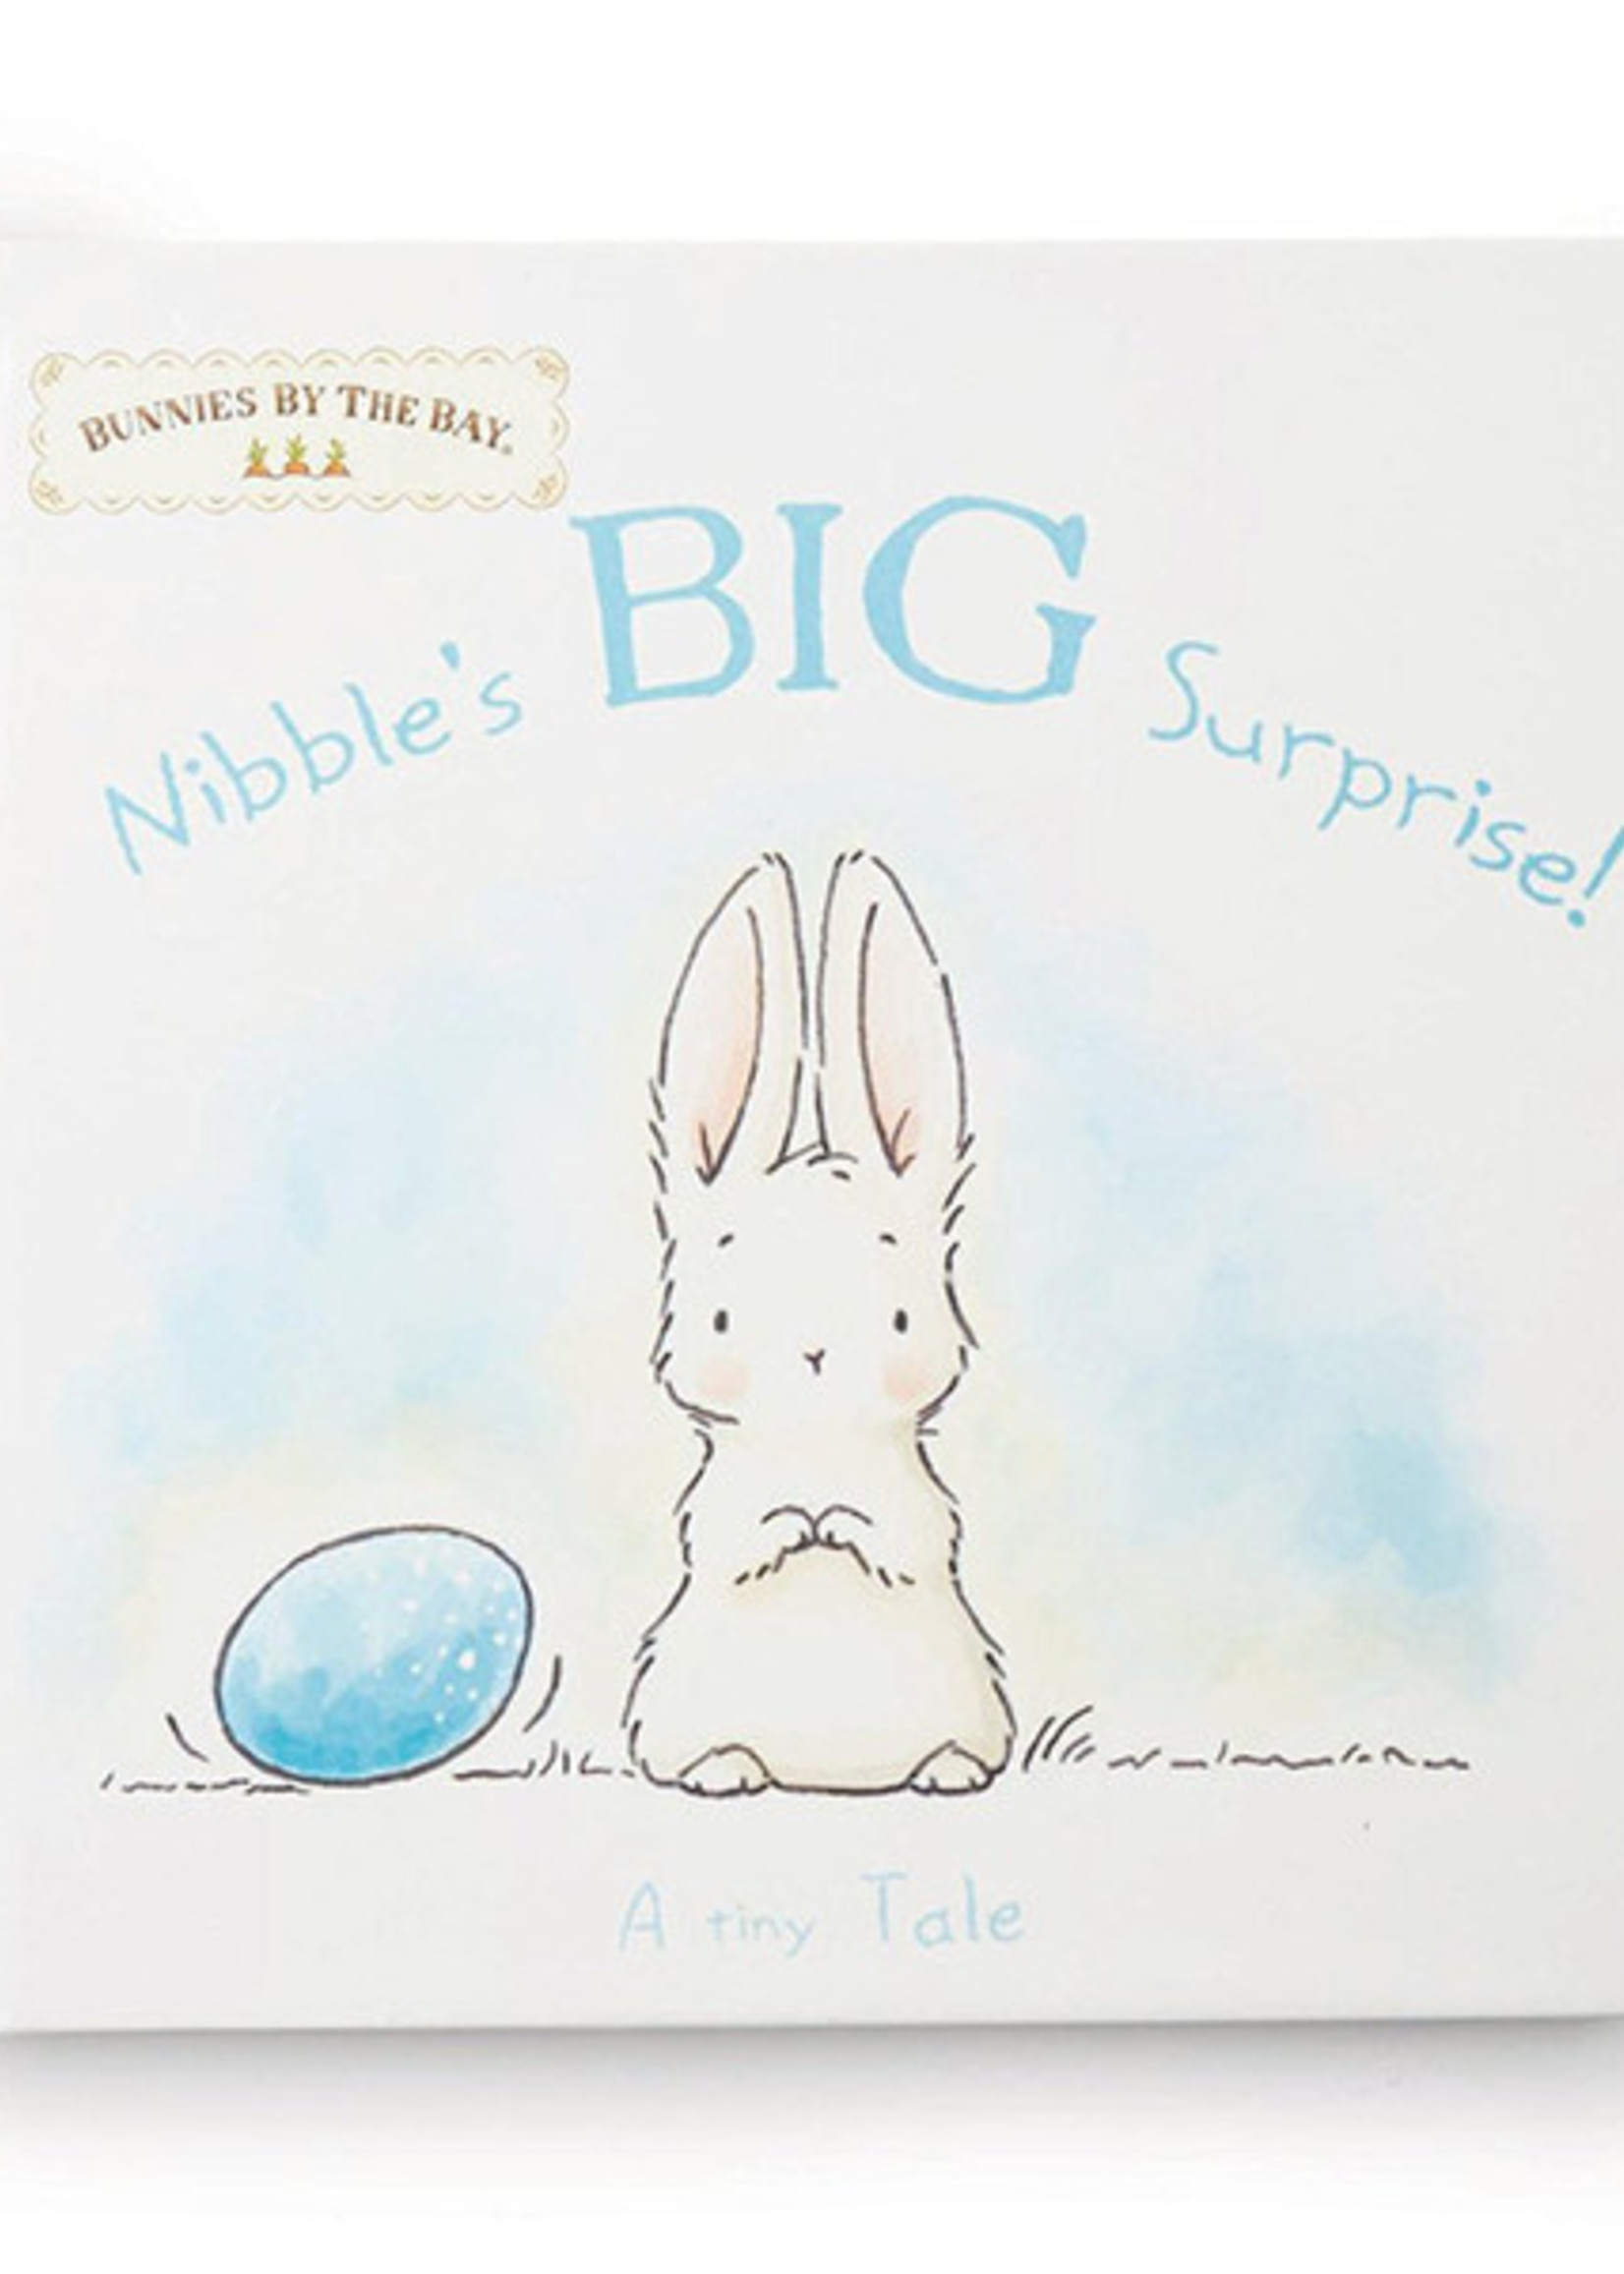 Bunnies By The Bay Book: Nibble’s Big Surprise